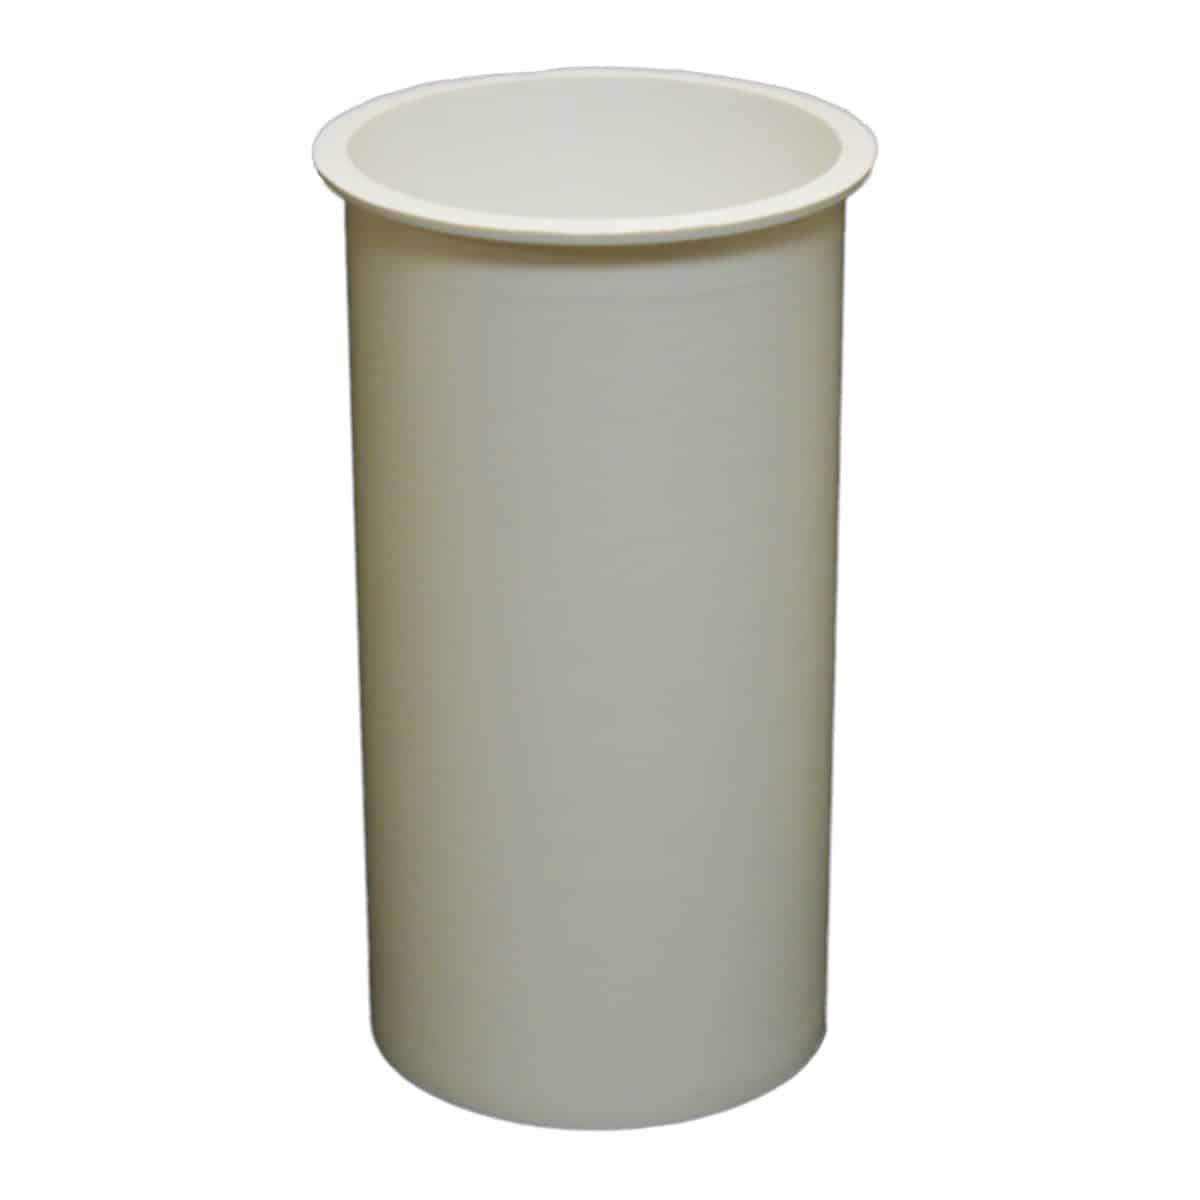 6-Inch White Cylinder Molds